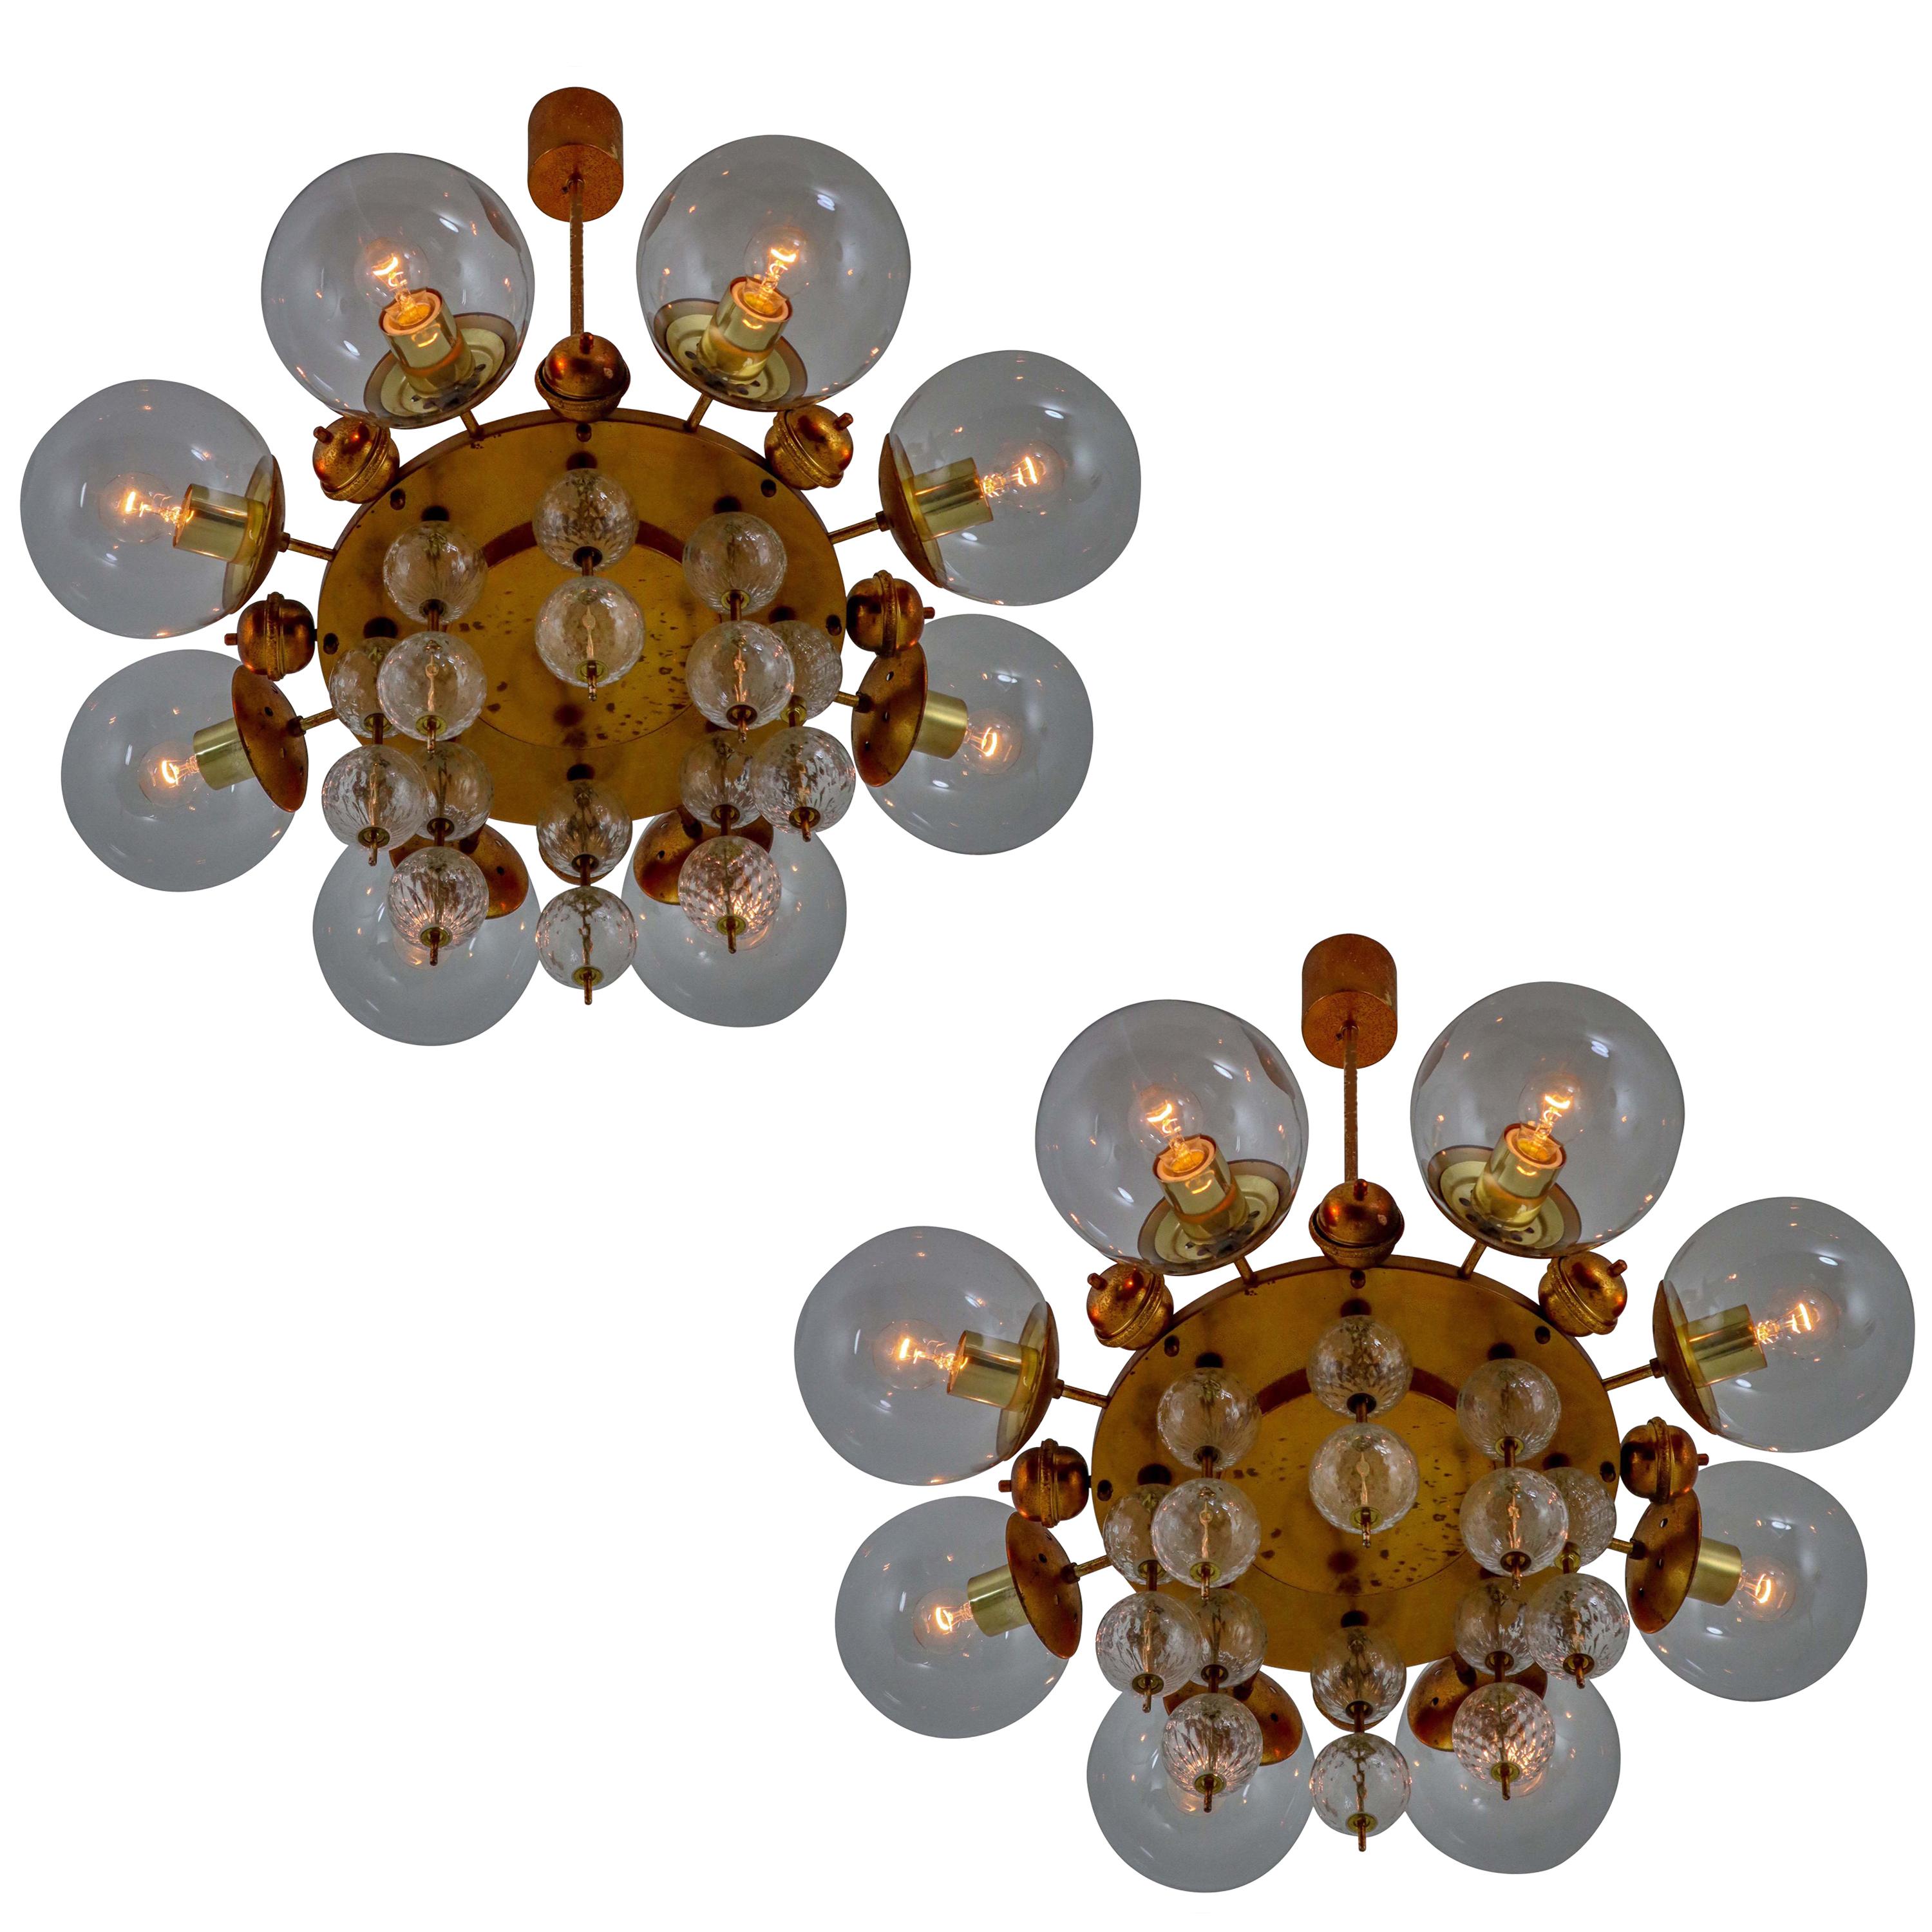 Midcentury Chandelier with Patinated Brass Fixture, Europe, 1950s